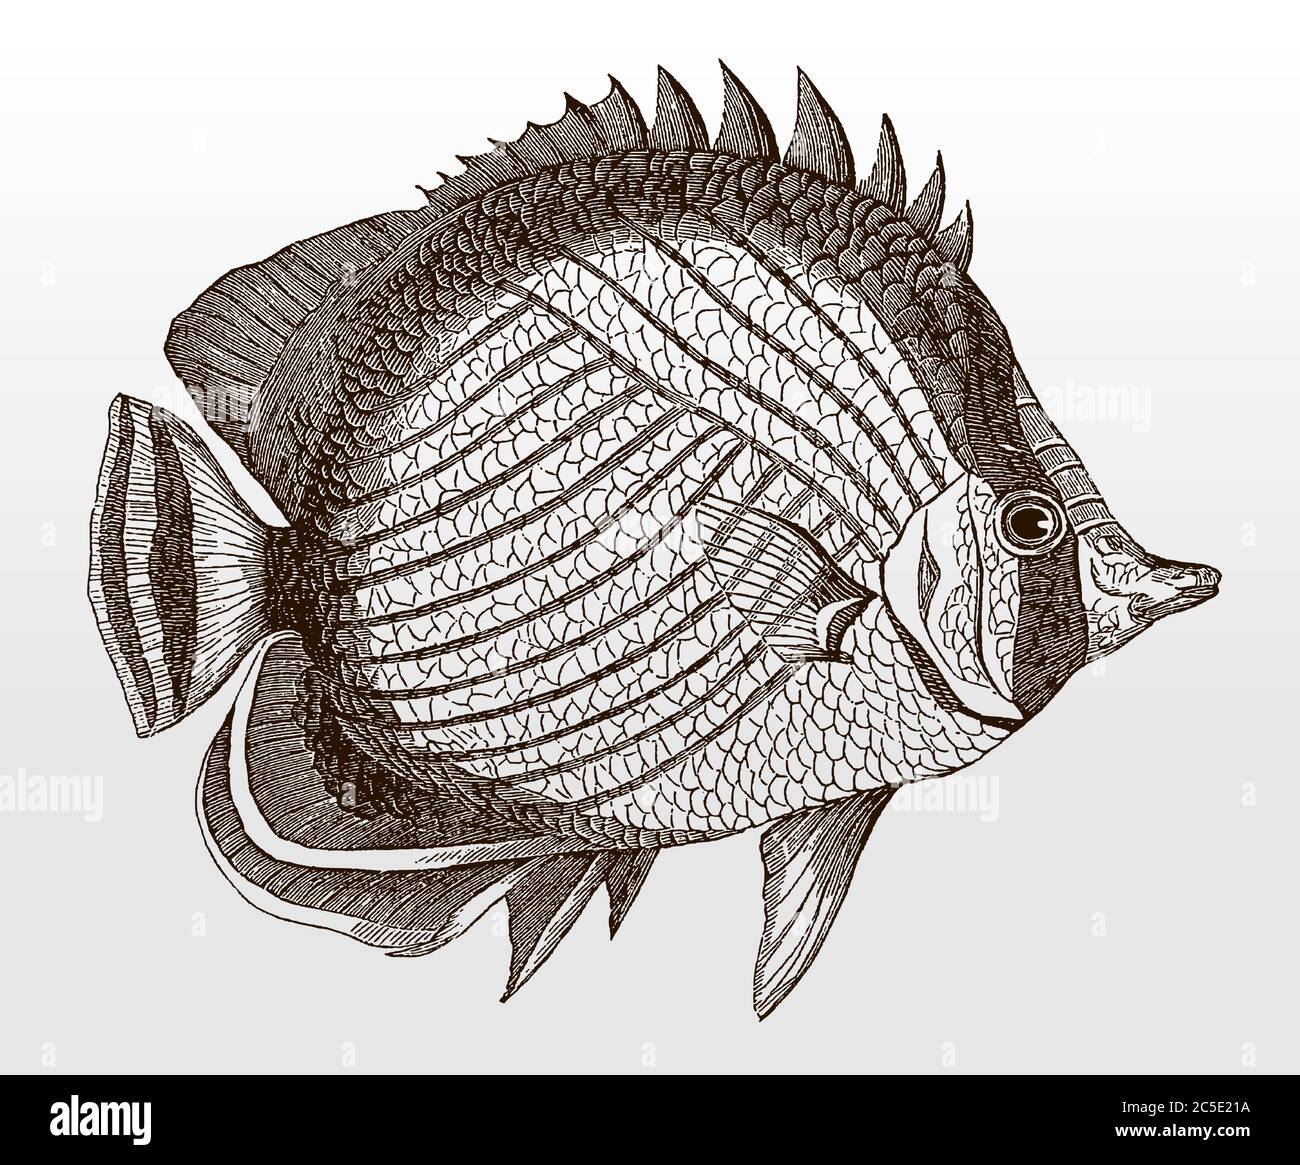 Vagabond butterflyfish, chaetodon vagabundus, an Indo-Pacific marine fish in side view after an antique illustration from the century Stock Vector Image Art -